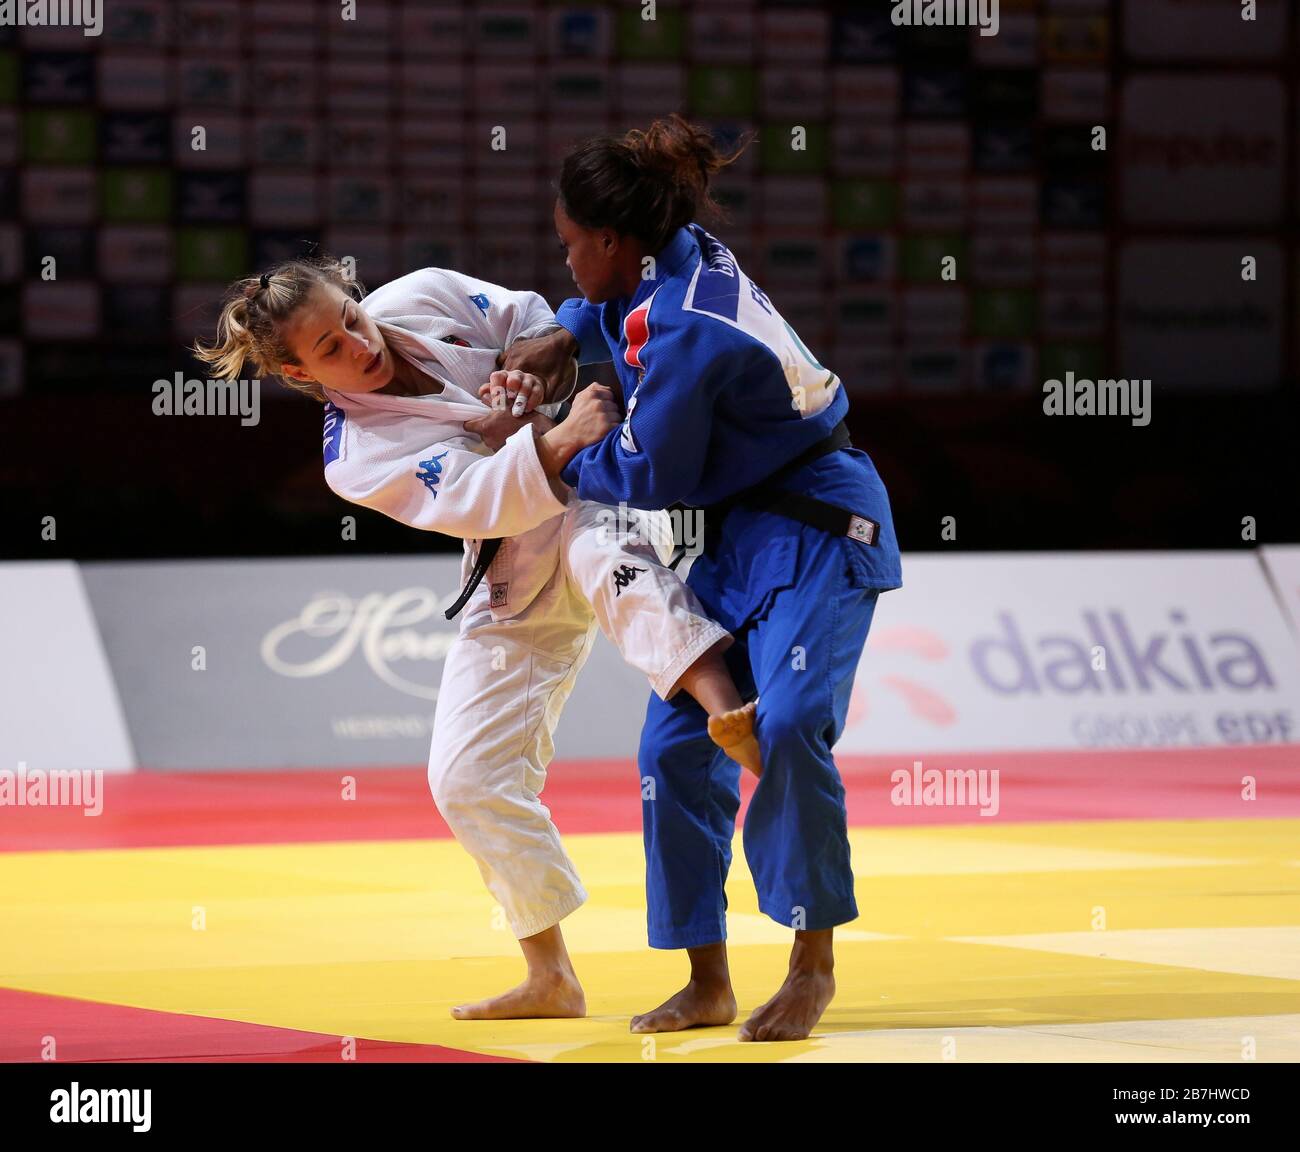 Paris, France - 08th Feb, 2020: Odette Giuffrida for Italy against Astride Gneto for France, Women's -52kg, Semi-Final (Credit: Mickael Chavet) Stock Photo